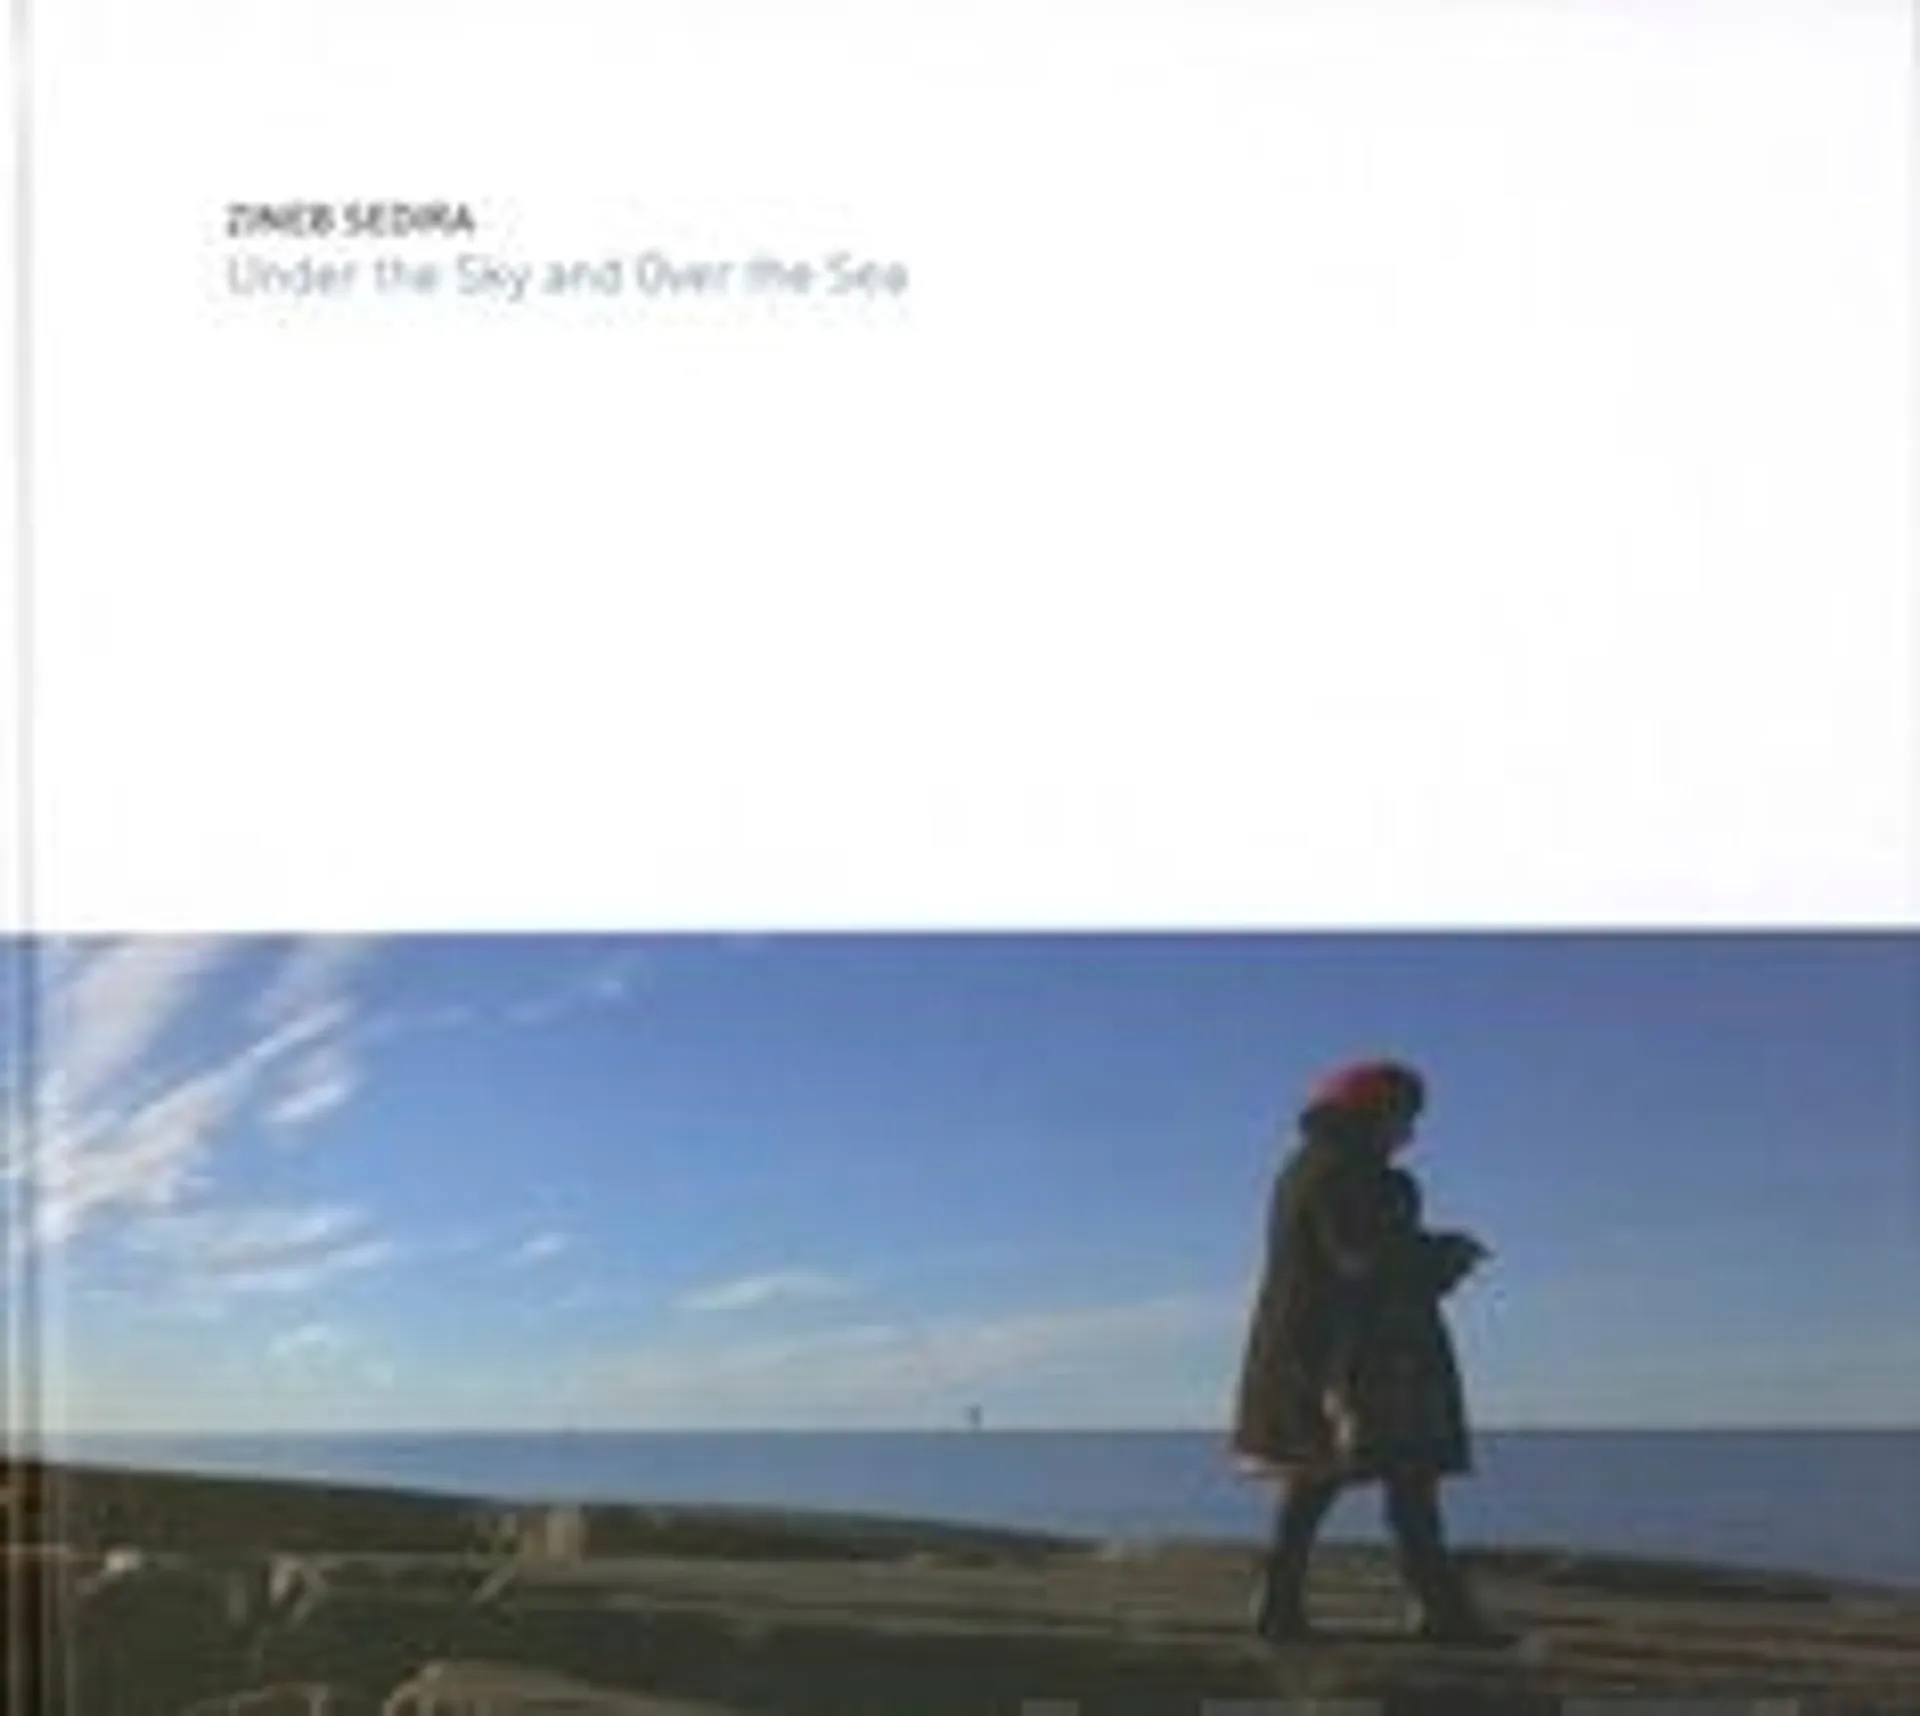 Zineb Sedira - Under the sky and over the sea